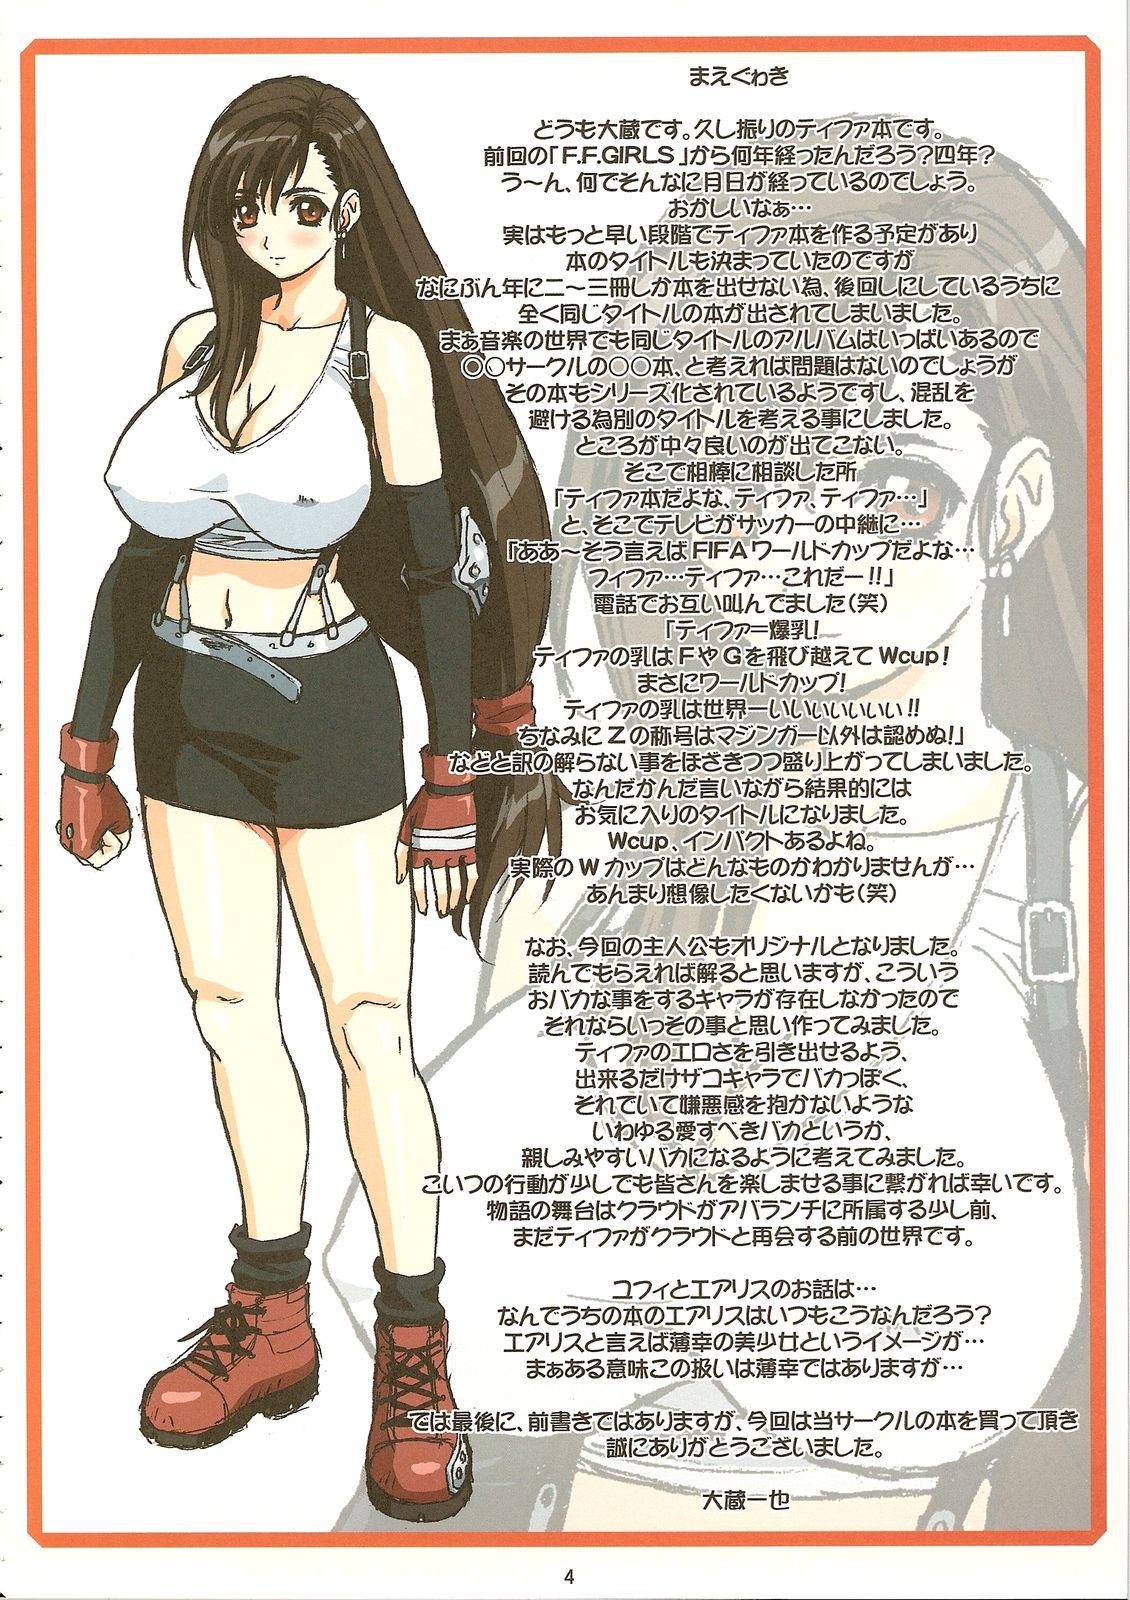 Freckles Tifa W cup - Final fantasy vii Stretching - Page 3